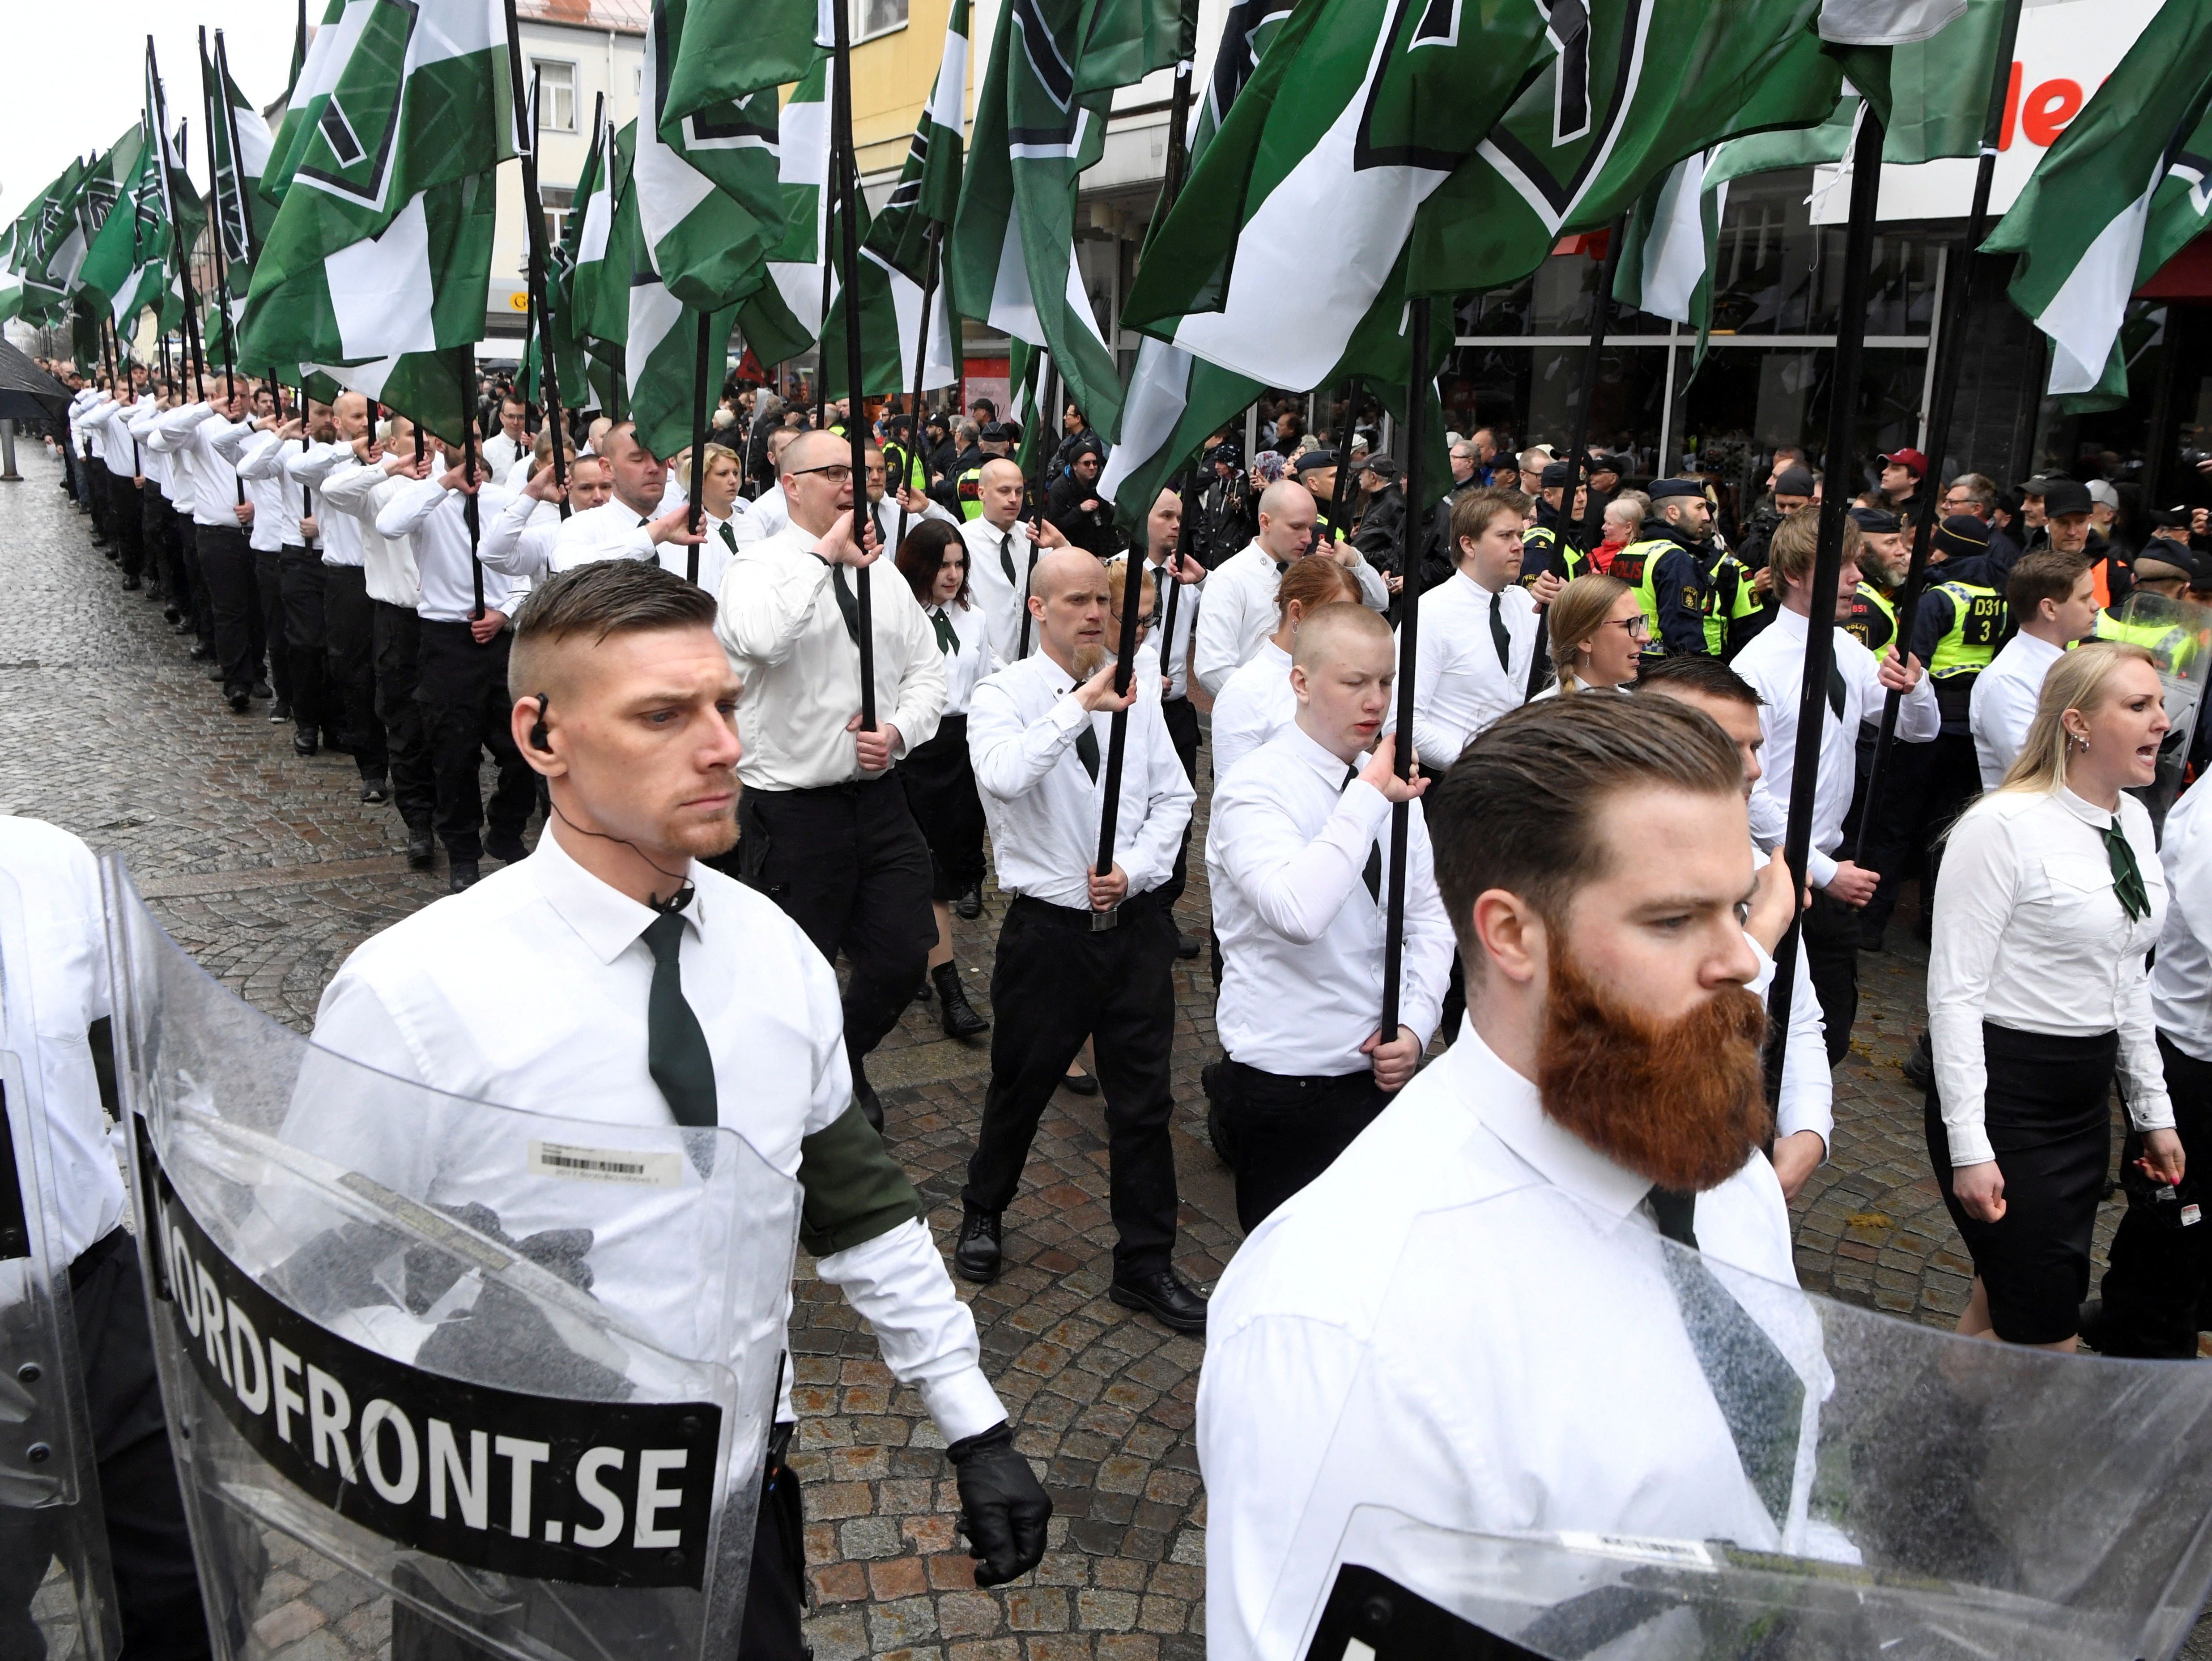 Members of the Neo-nazi Nordic Resistance Movement march through the town of Ludvika